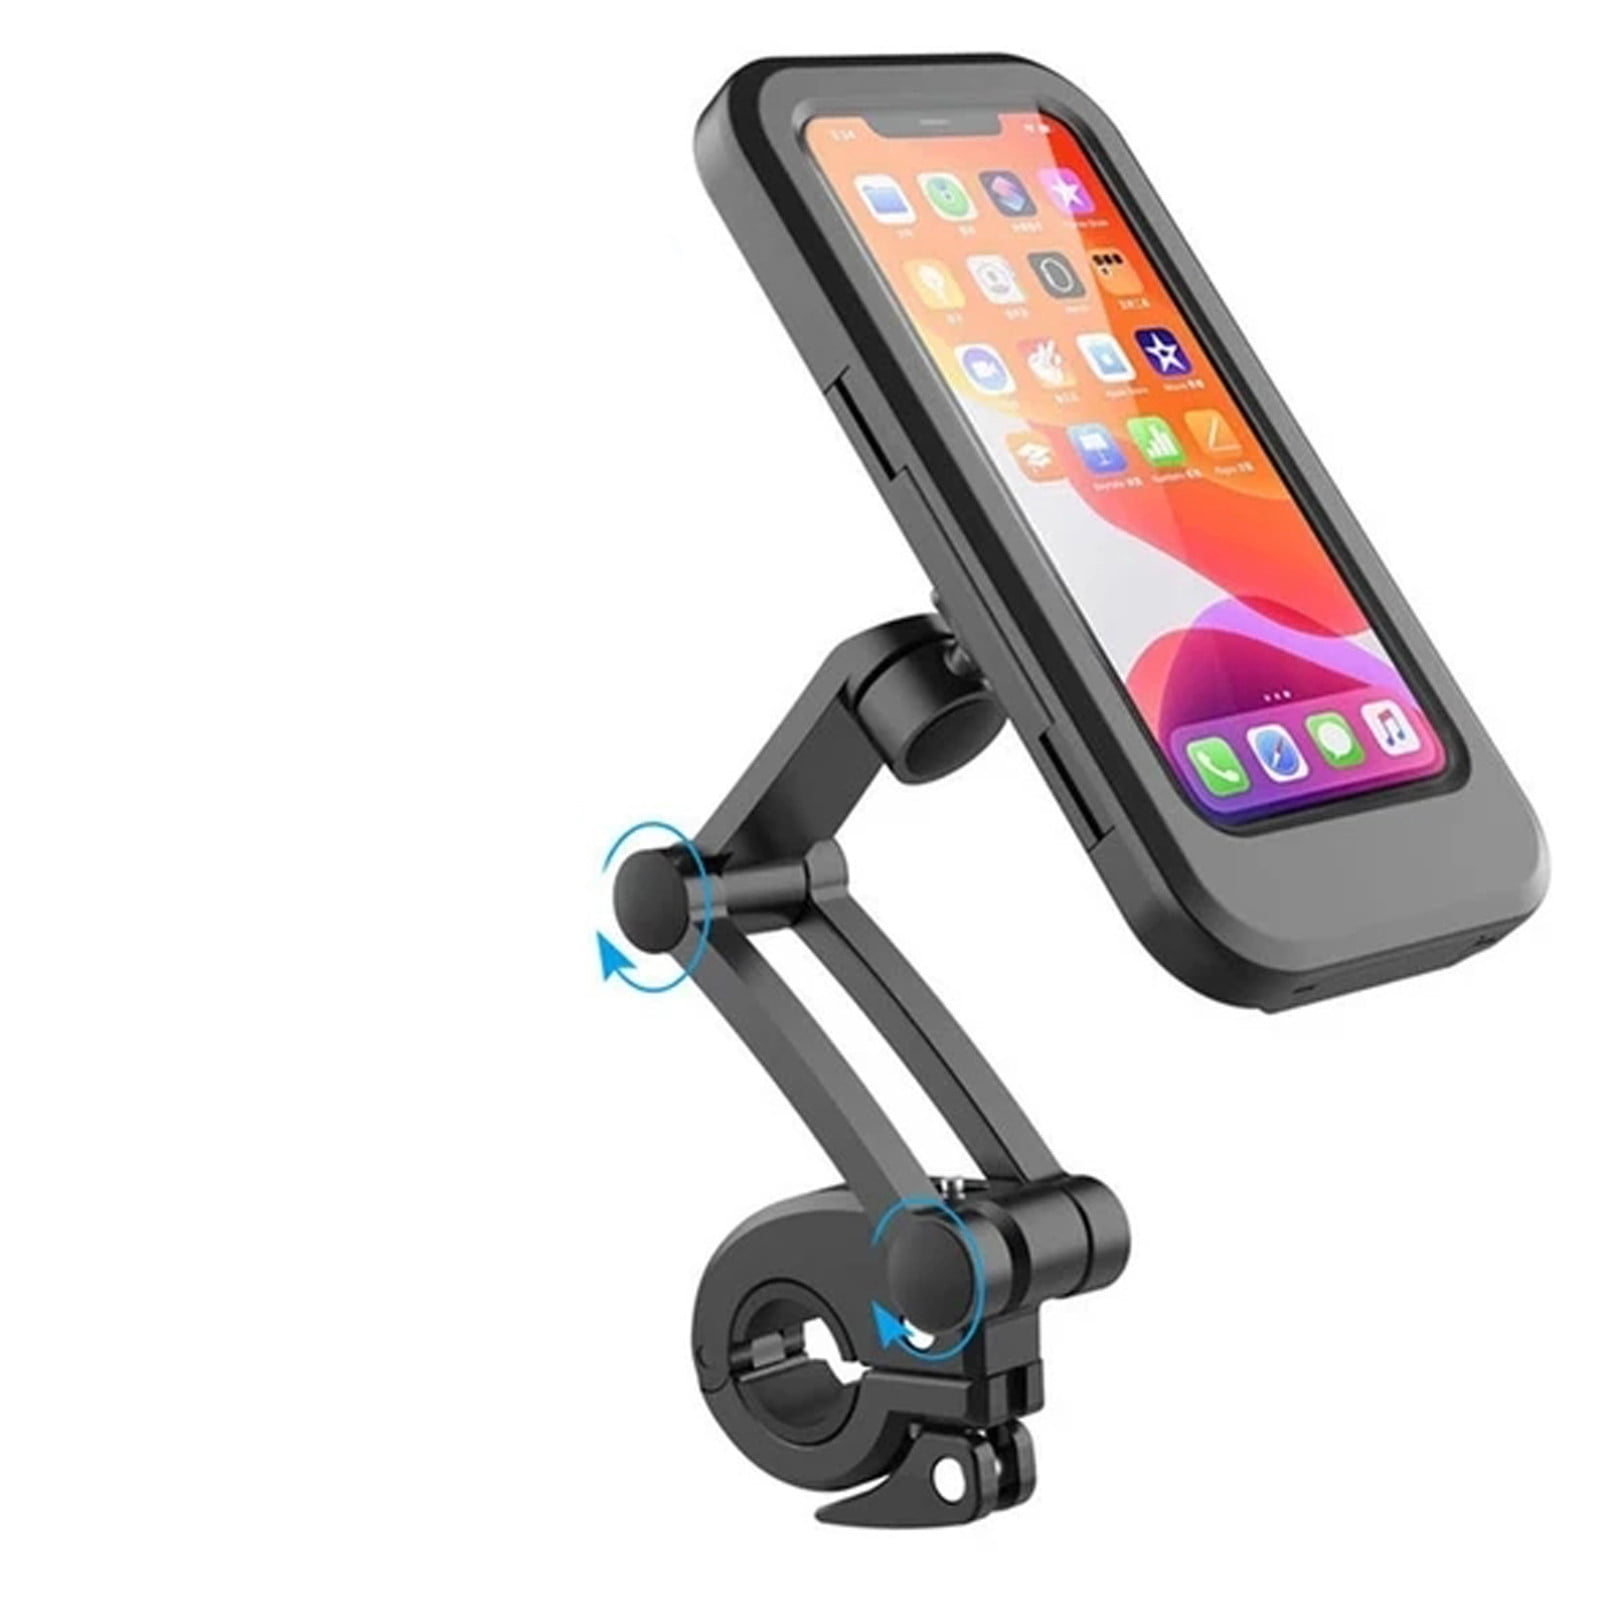 Bike Phone Holder Portable Invisible Folding Ring-Shaped Aluminum Alloy Waterproof Phone Mount Motorcycle Bicycle Handlebar Phone Stand Clamp Phone Navigation Bracket New Red 